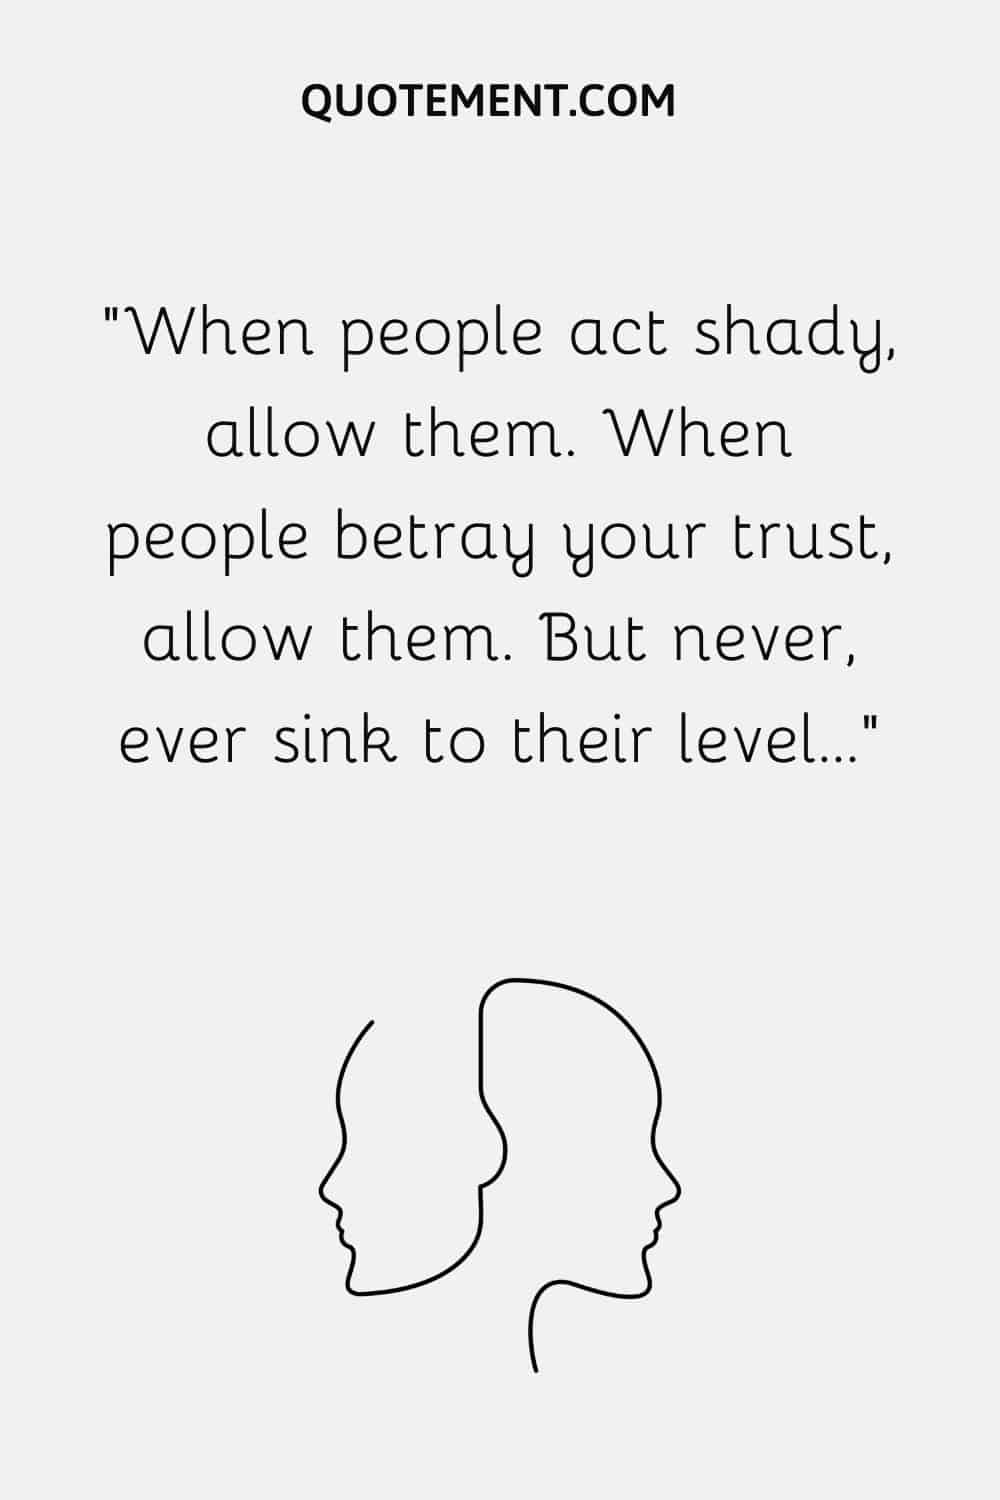 When people act shady, allow them.